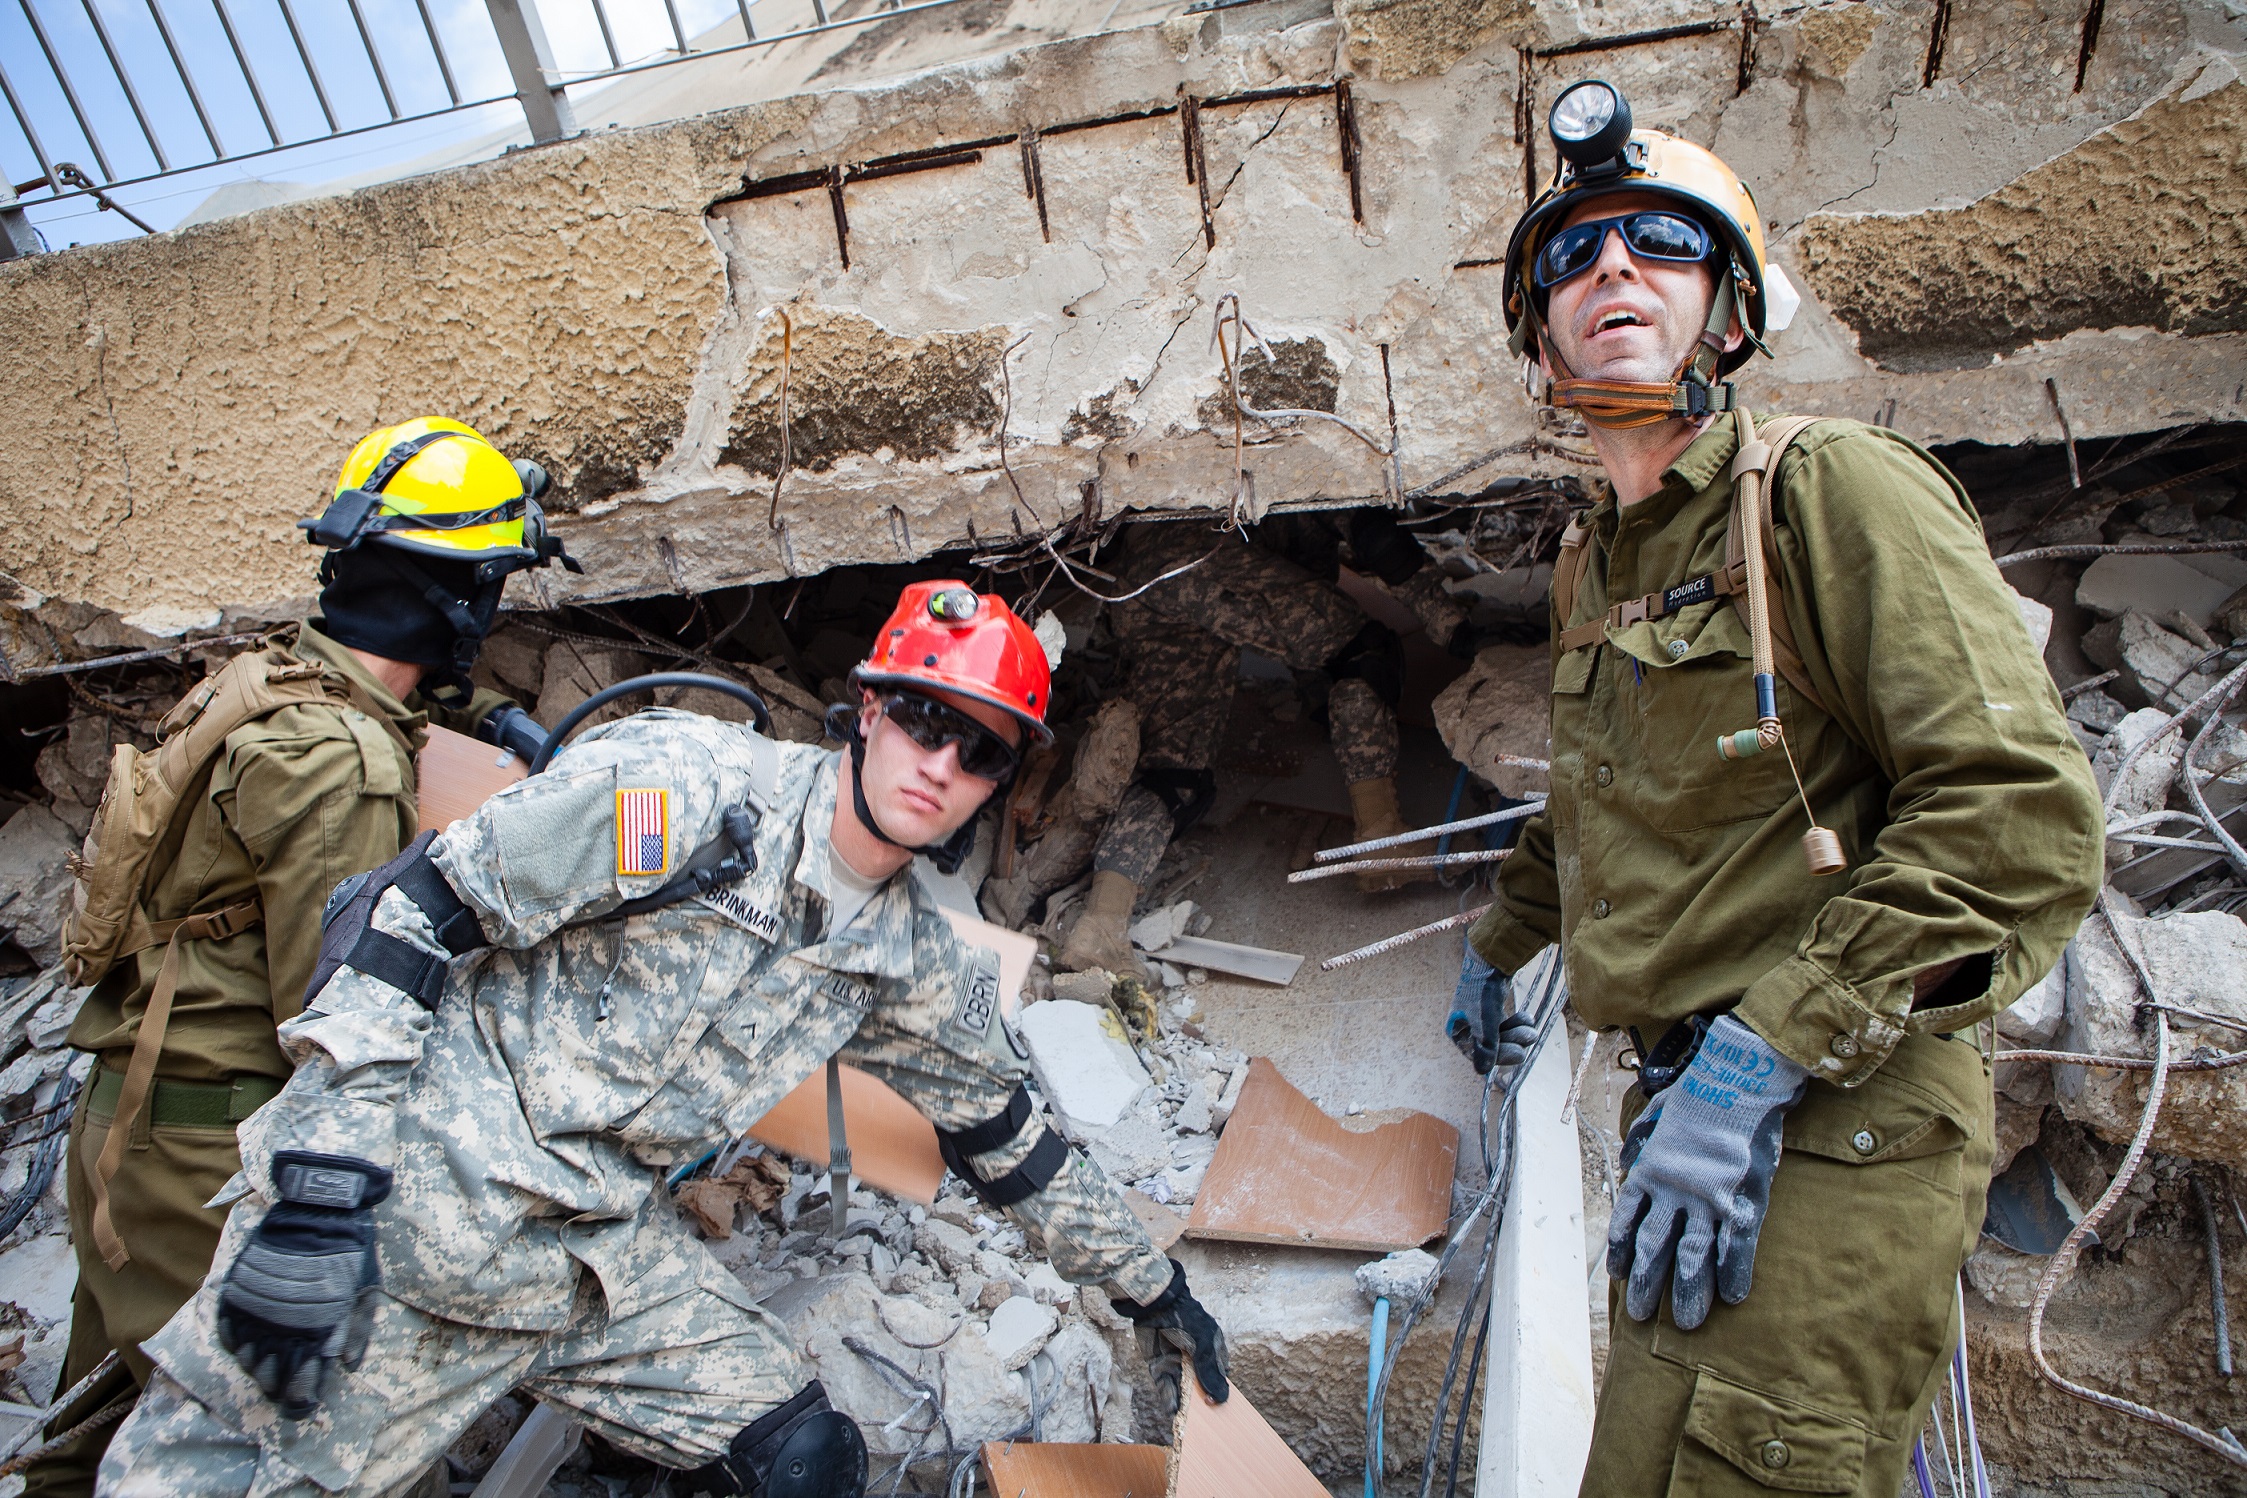 A joint exercise for the IDF and the United States Army |